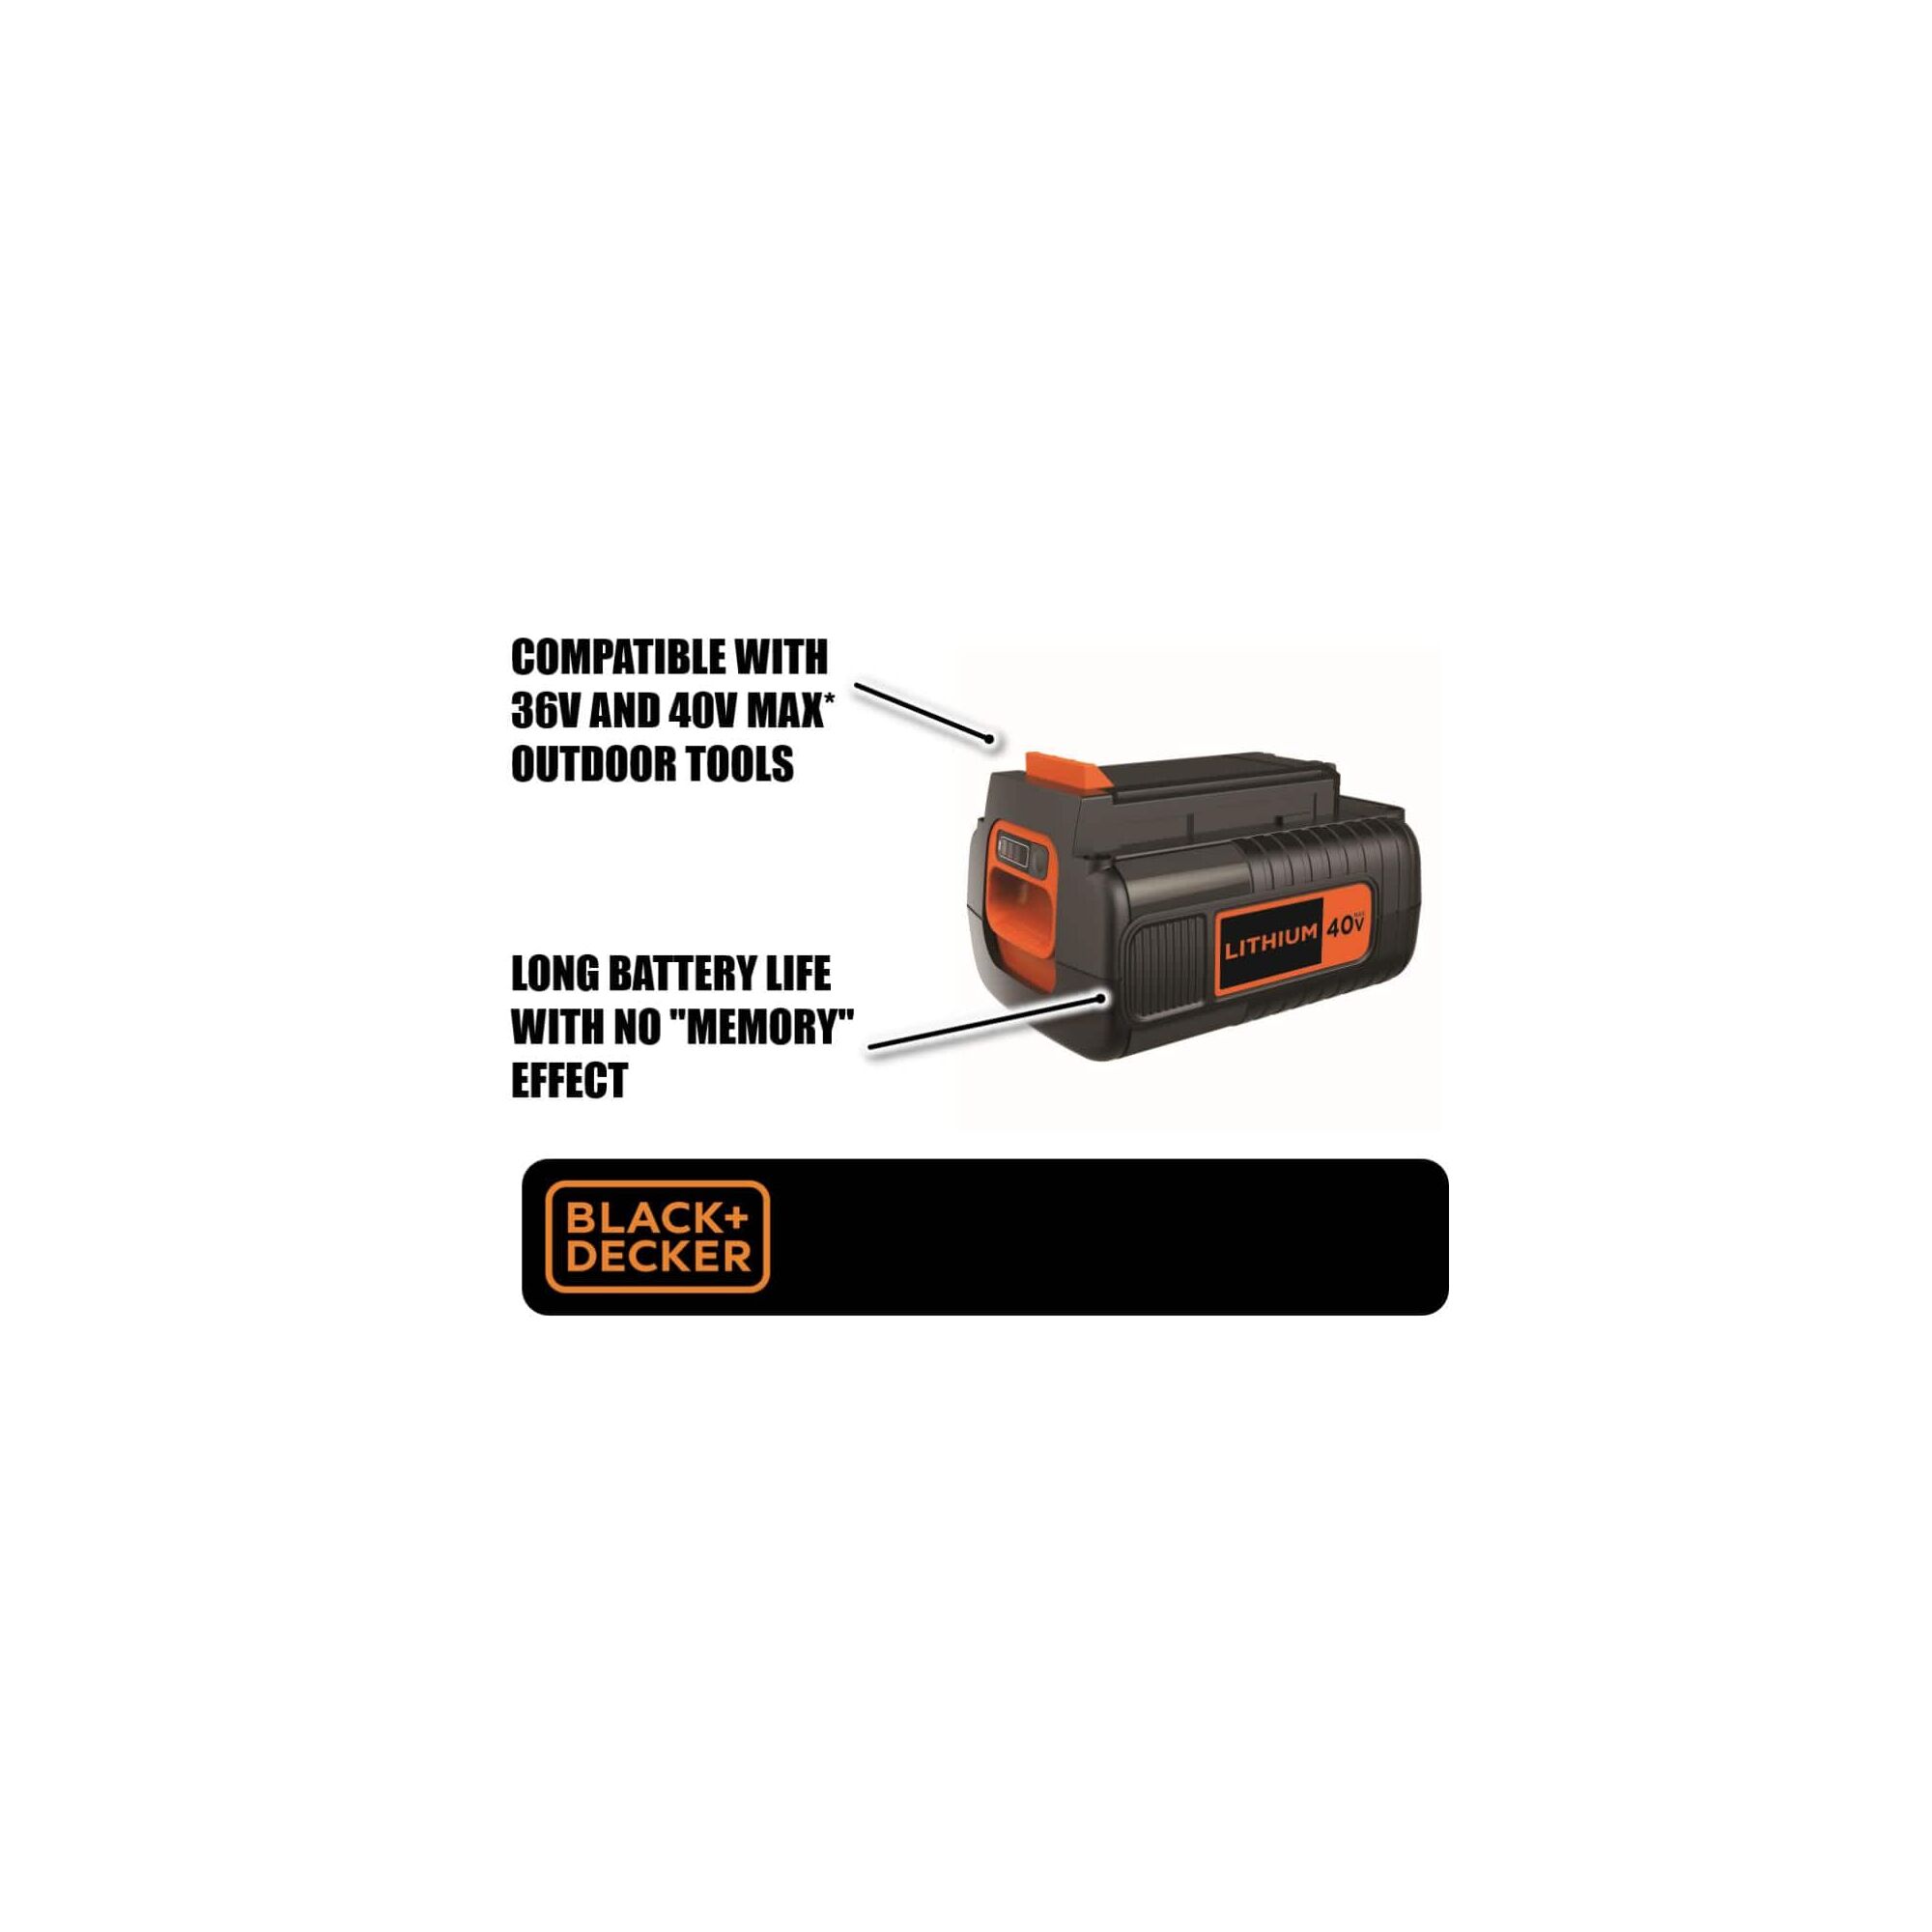 Graphic showing key features of the 40V Max battery